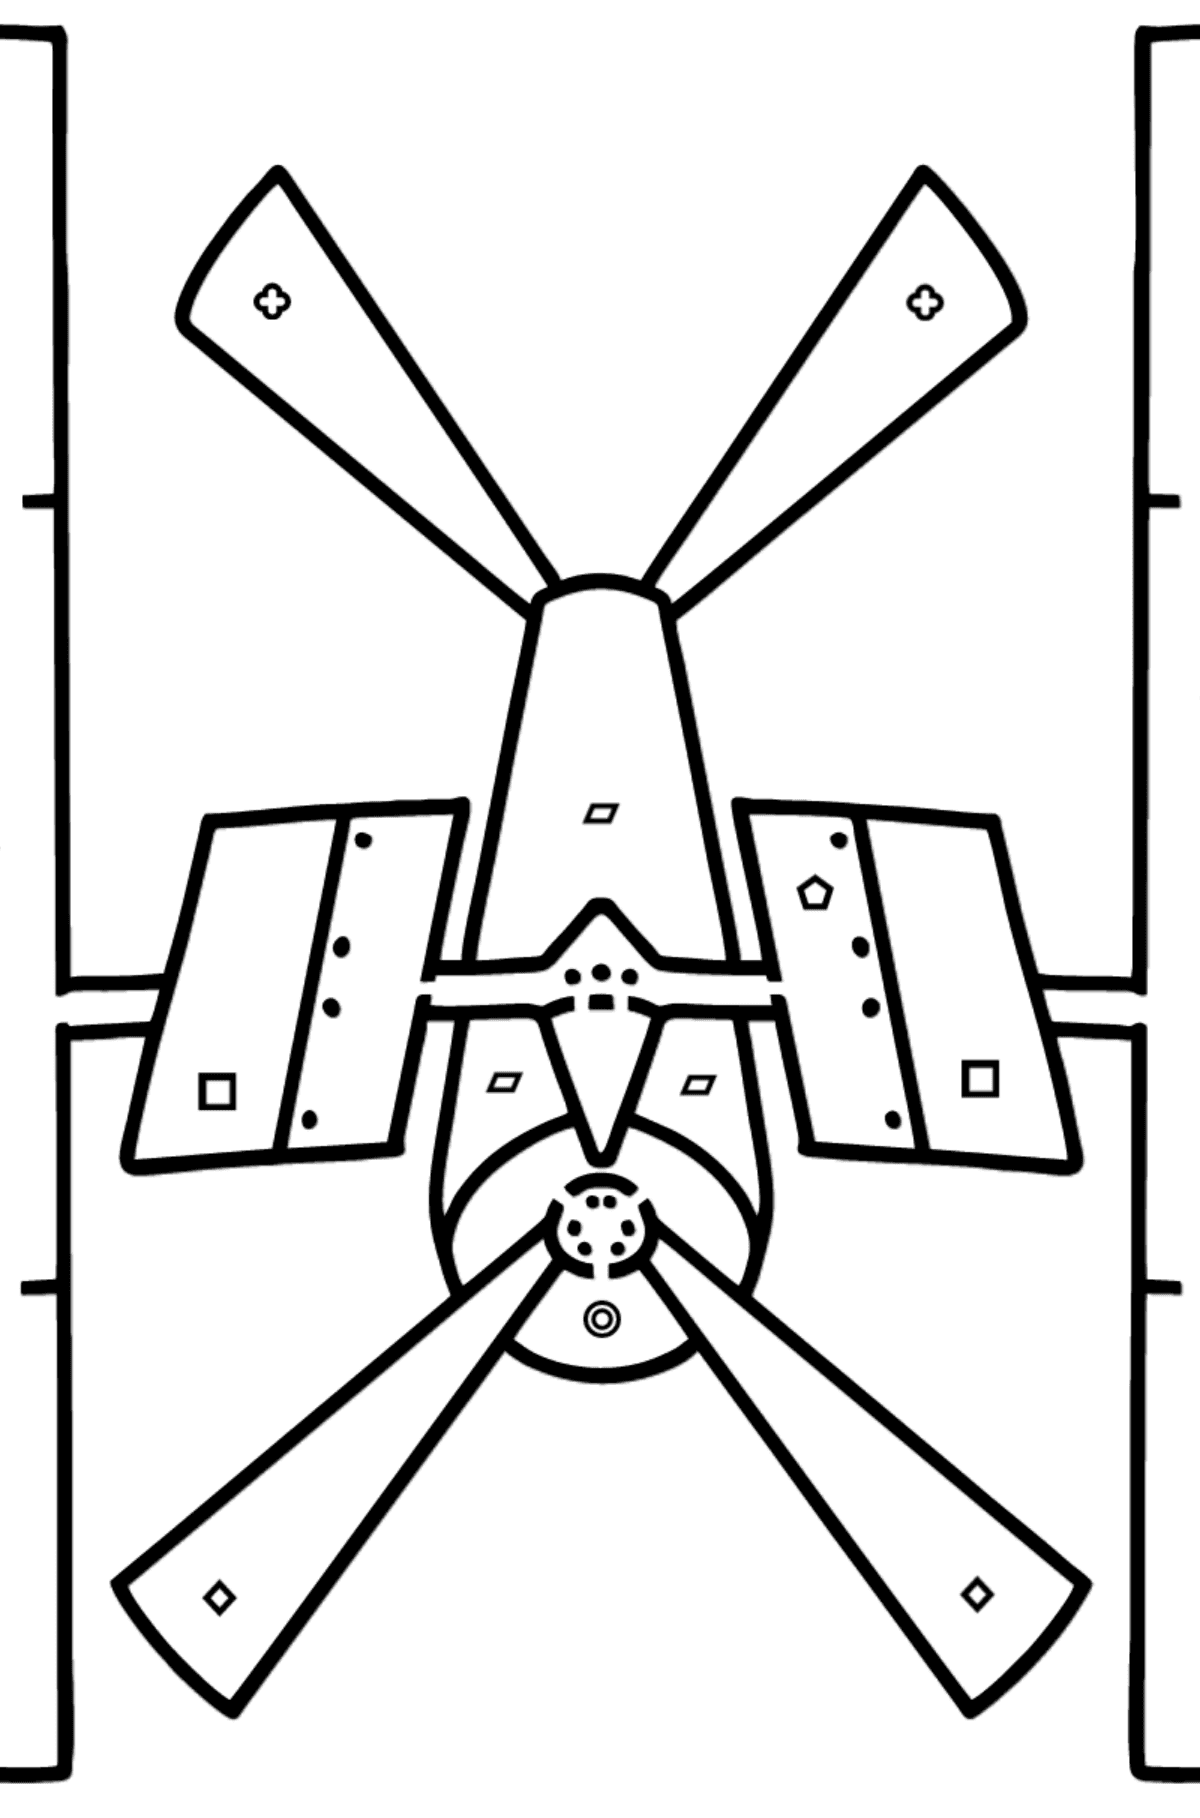 Space Station coloring page - Coloring by Geometric Shapes for Kids